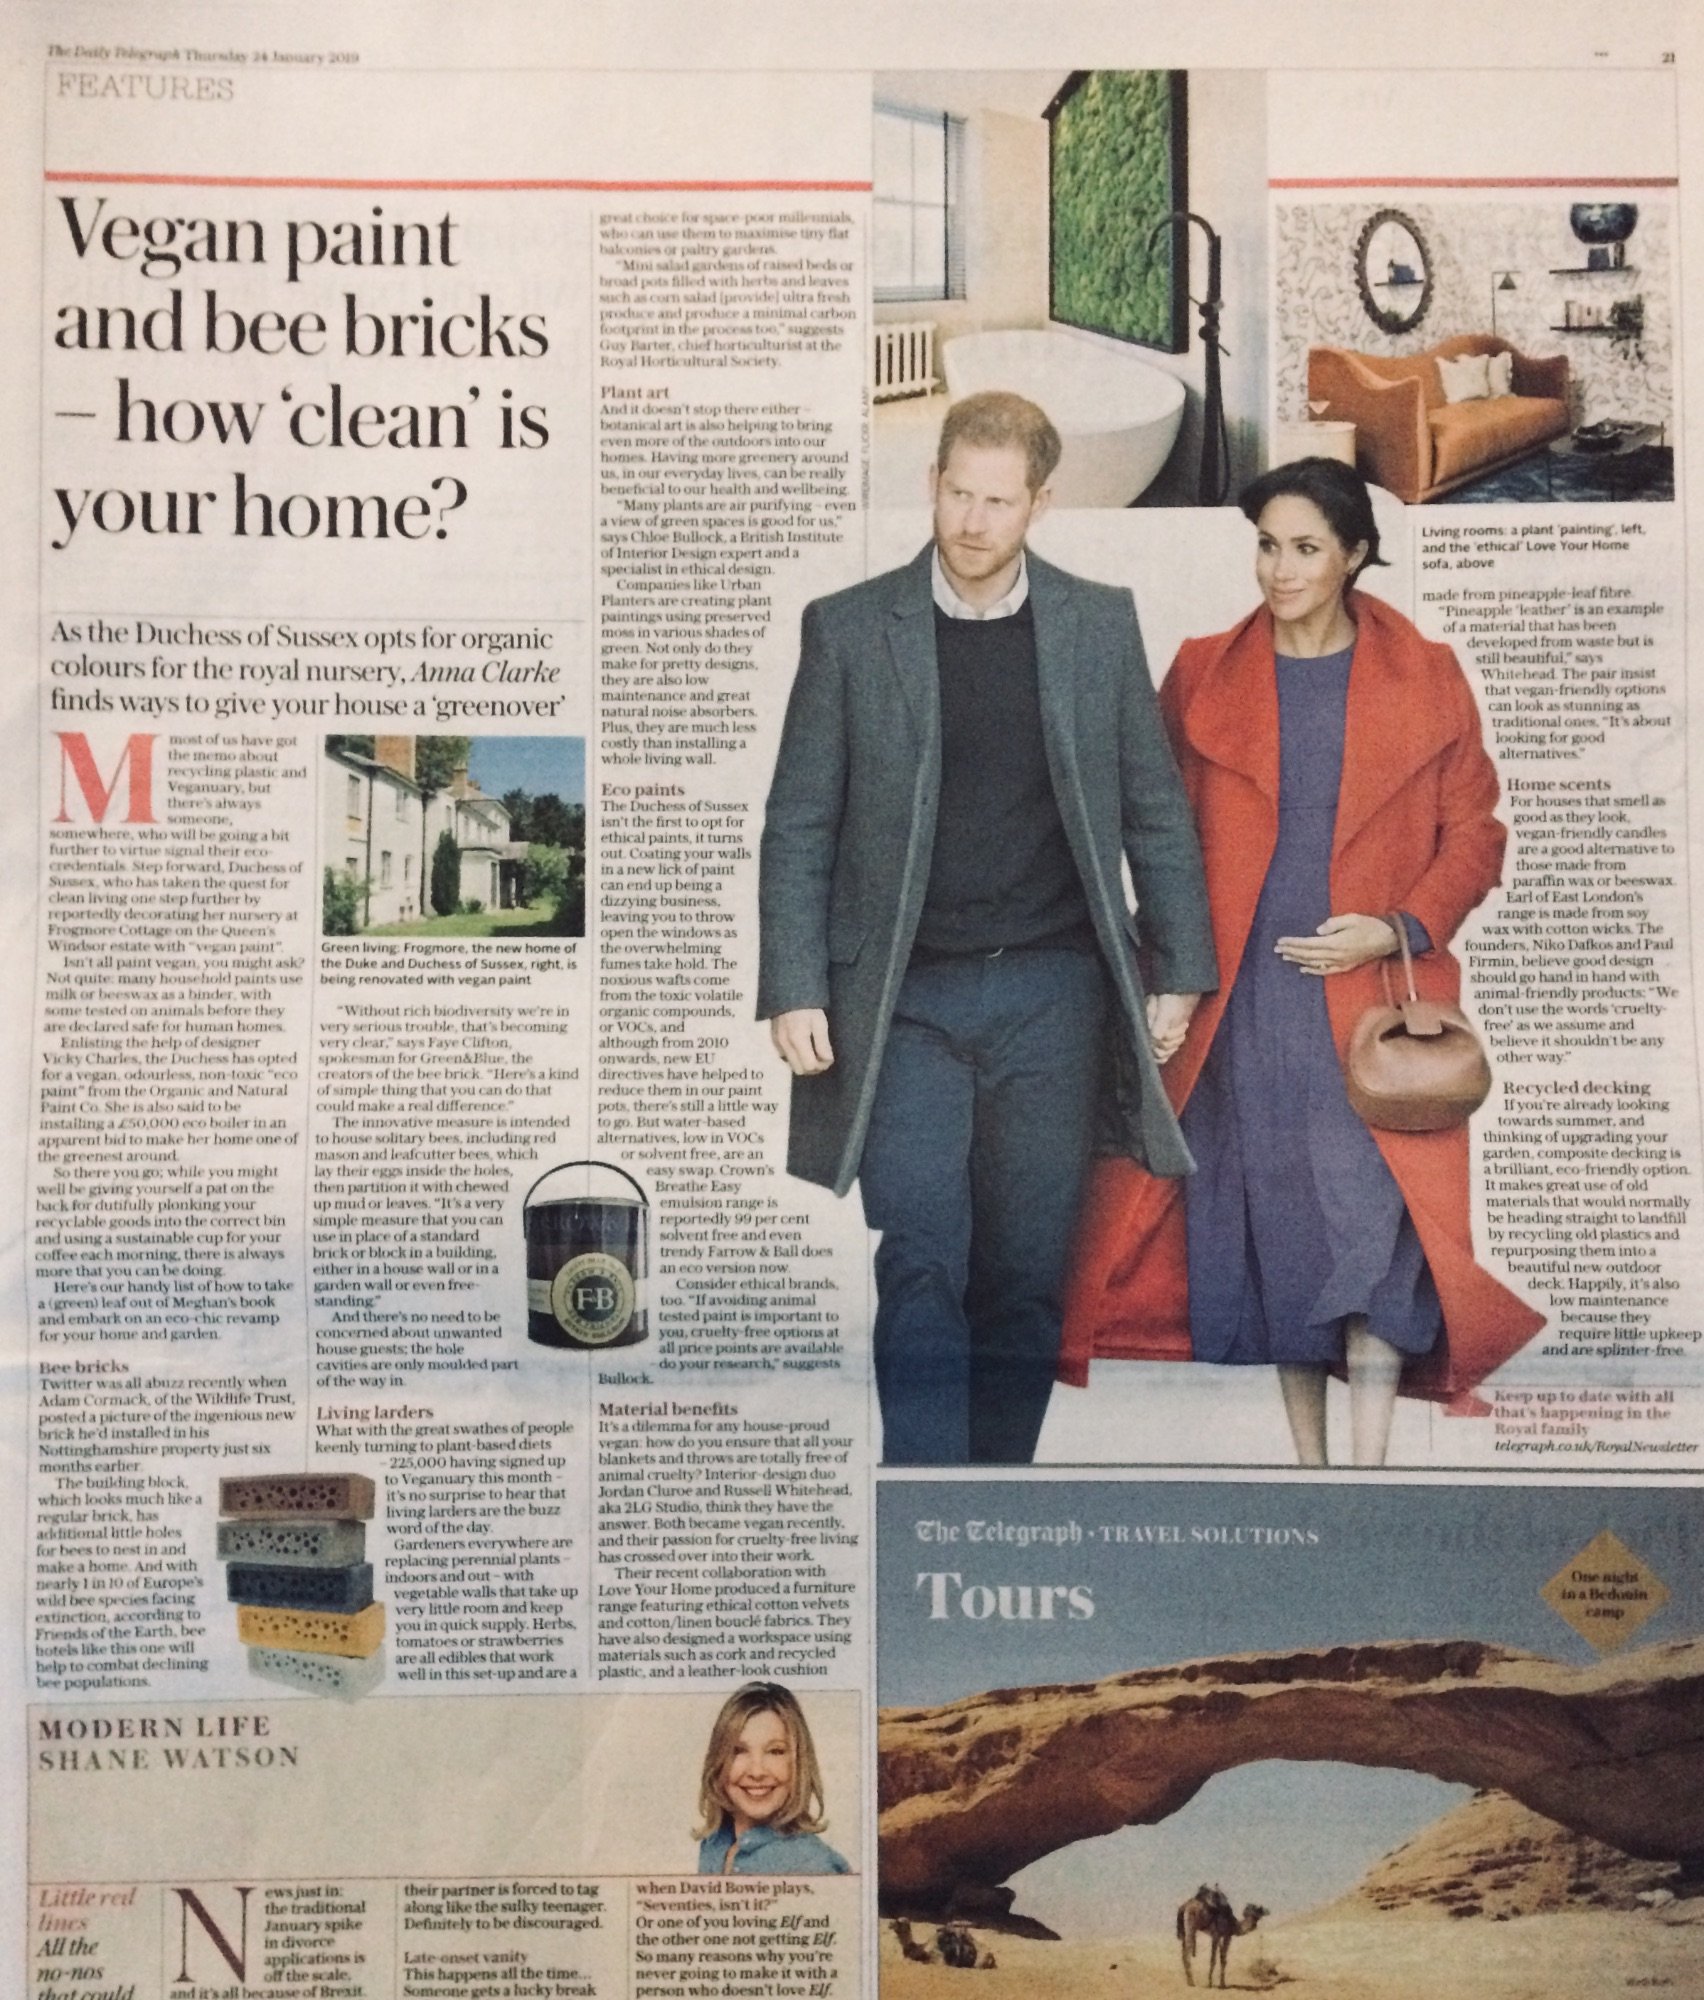 The Telegraph article